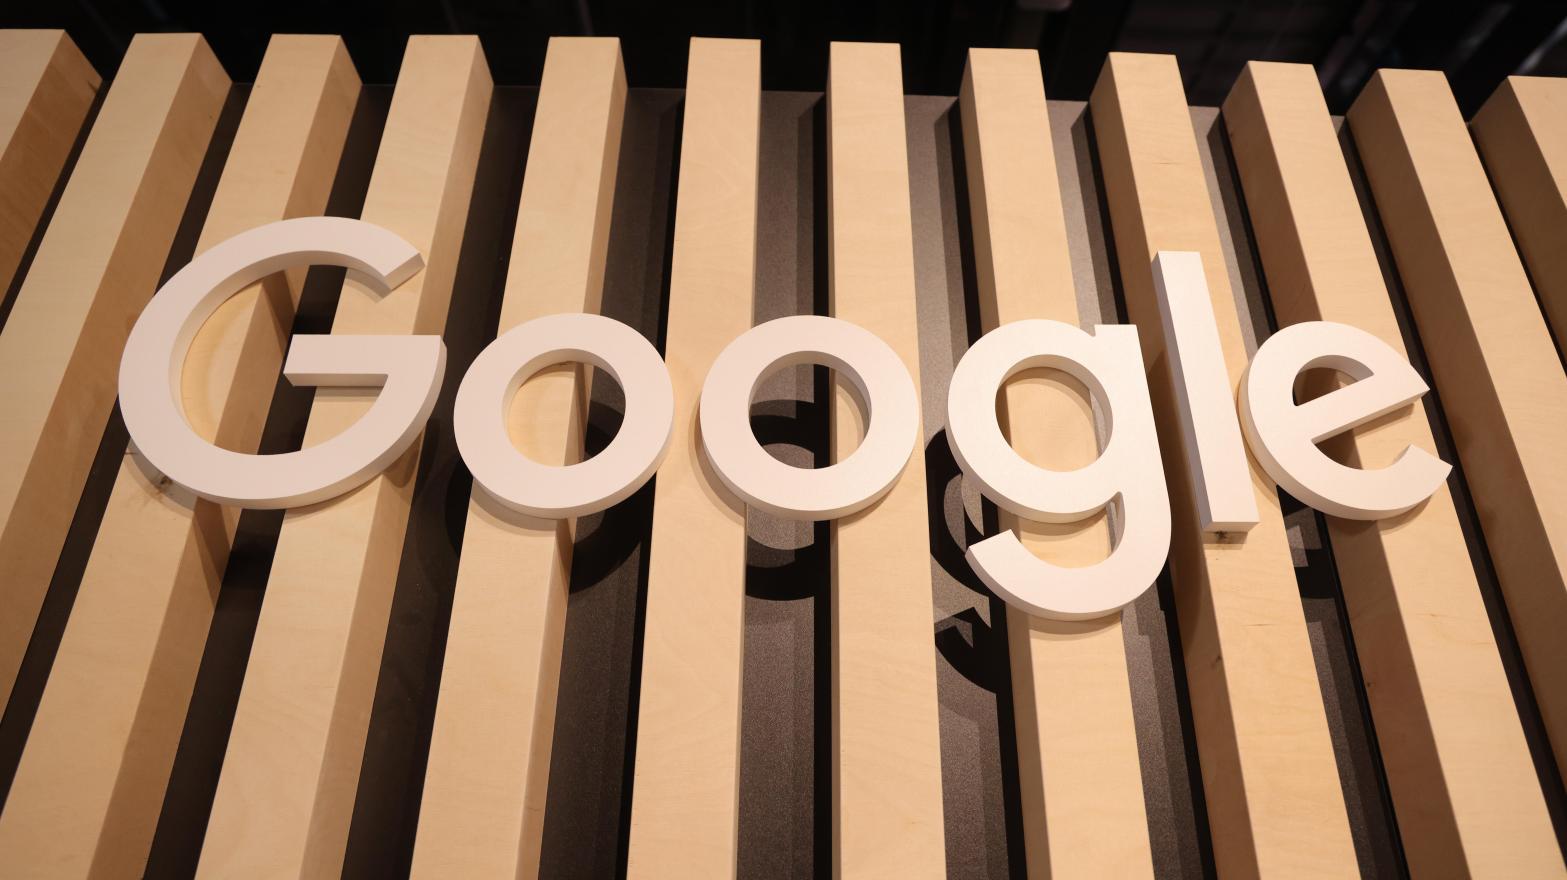 Google drew scrutiny after it displayed fireworks and the American flag next to search results related to the Highland Park shooting on July 4. The company said it was an accident. (Photo: Sean Gallup, Getty Images)